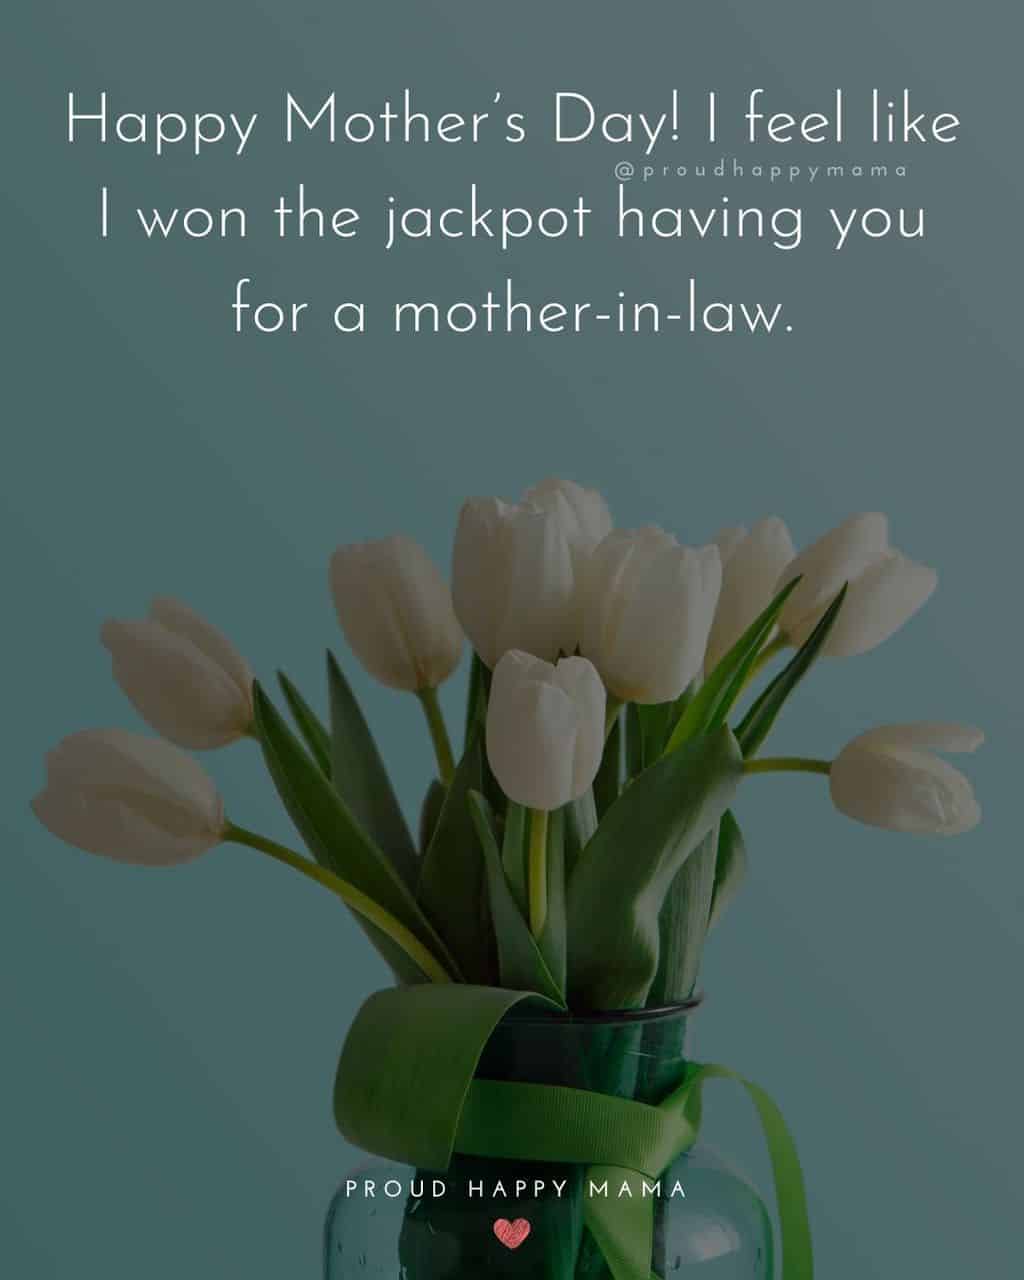 Happy-Mothers-Day-Quotes-For-Mother-In-Law-Happy-Mothers-Day-I-feel-like-I-won-the-jackpot-having-you-for-a-mother-in-law.